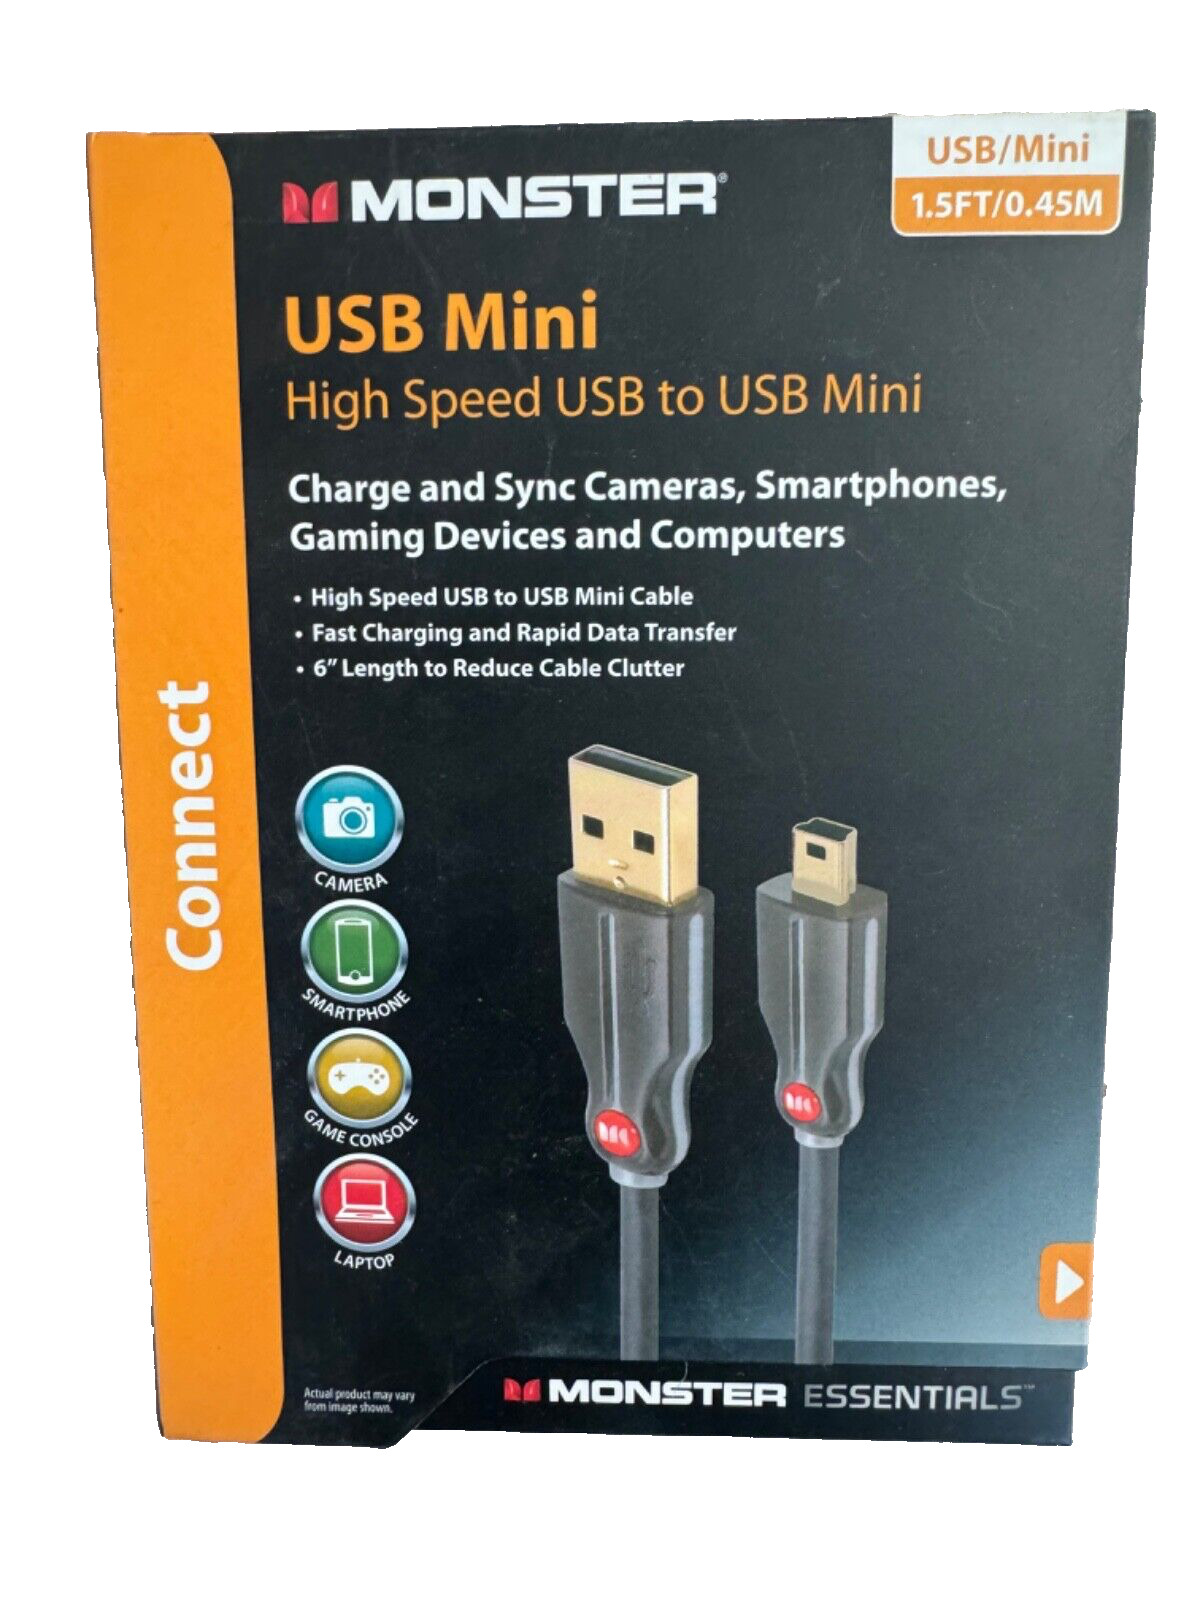 Monster USB  Mini High Speed ISB to USB Mini Cable Charge and Sync